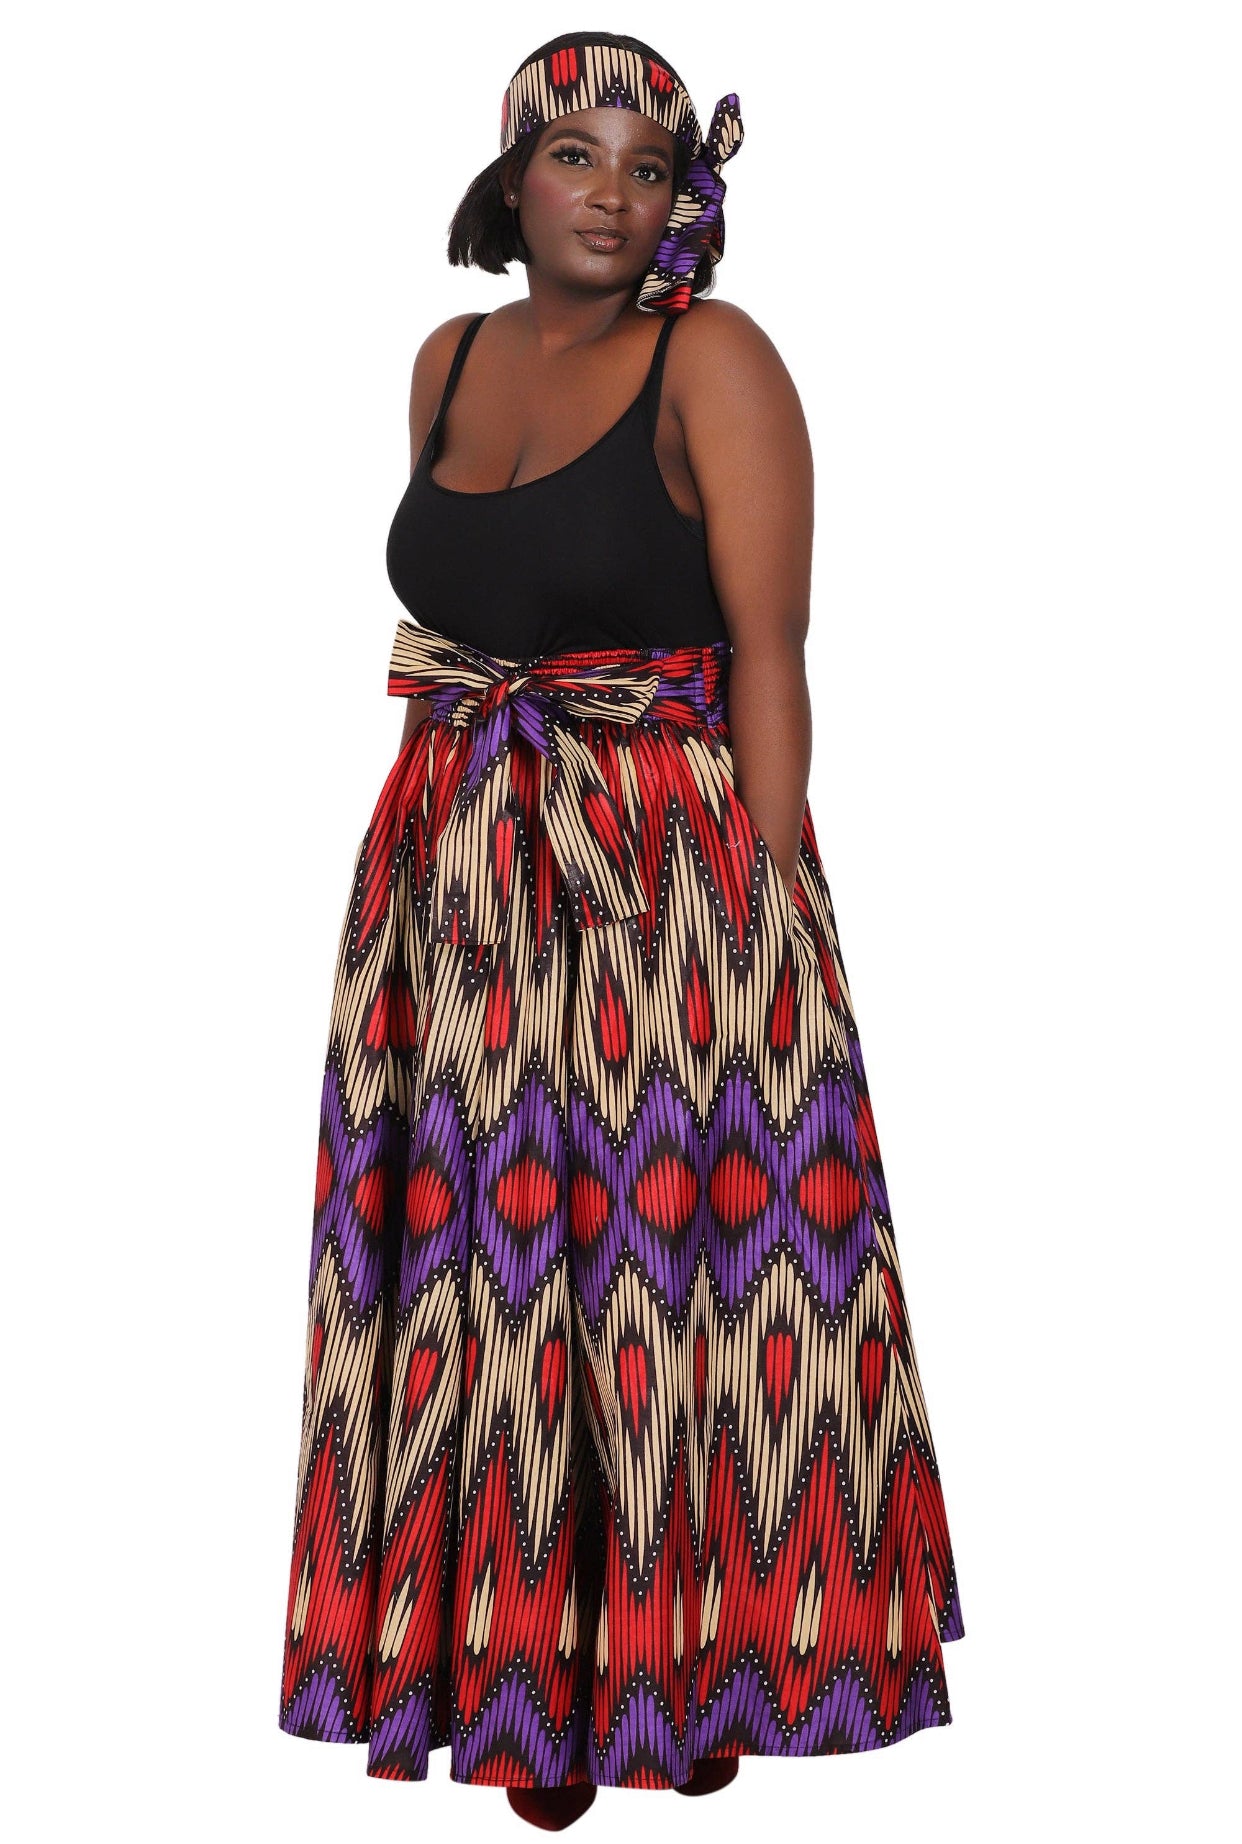 African Print Full Skirt with Coordinating Head Wrap (Purple, Red, Beige, Black)